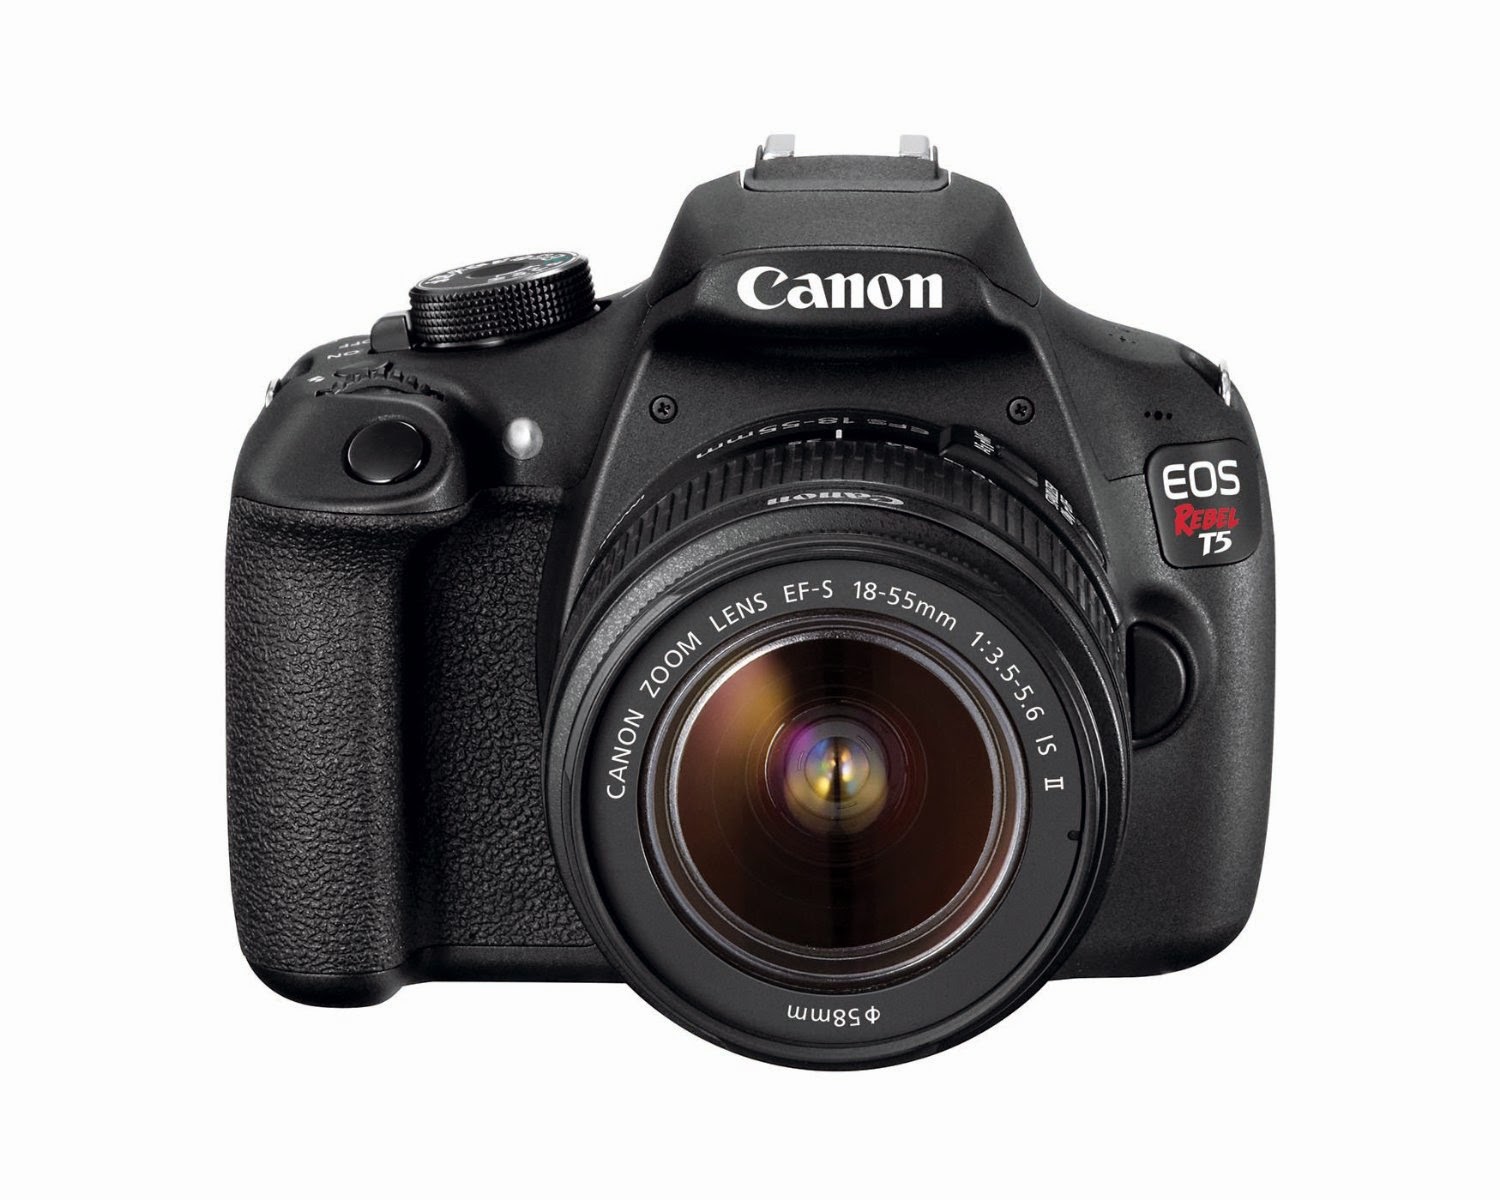 Canon EOS Rebel T5 DSLR, front view, picture, image, review features & specifications